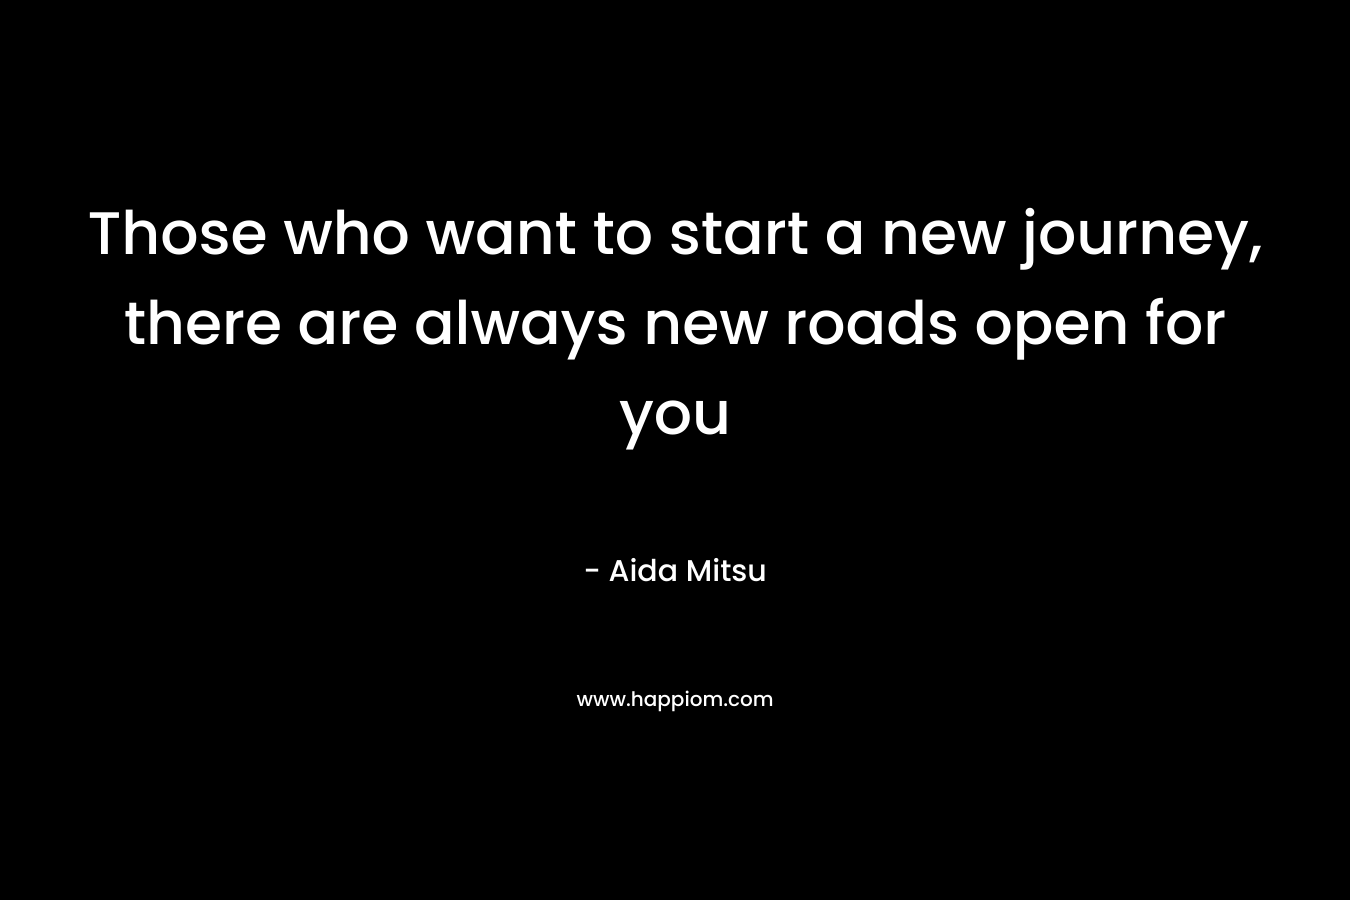 Those who want to start a new journey, there are always new roads open for you